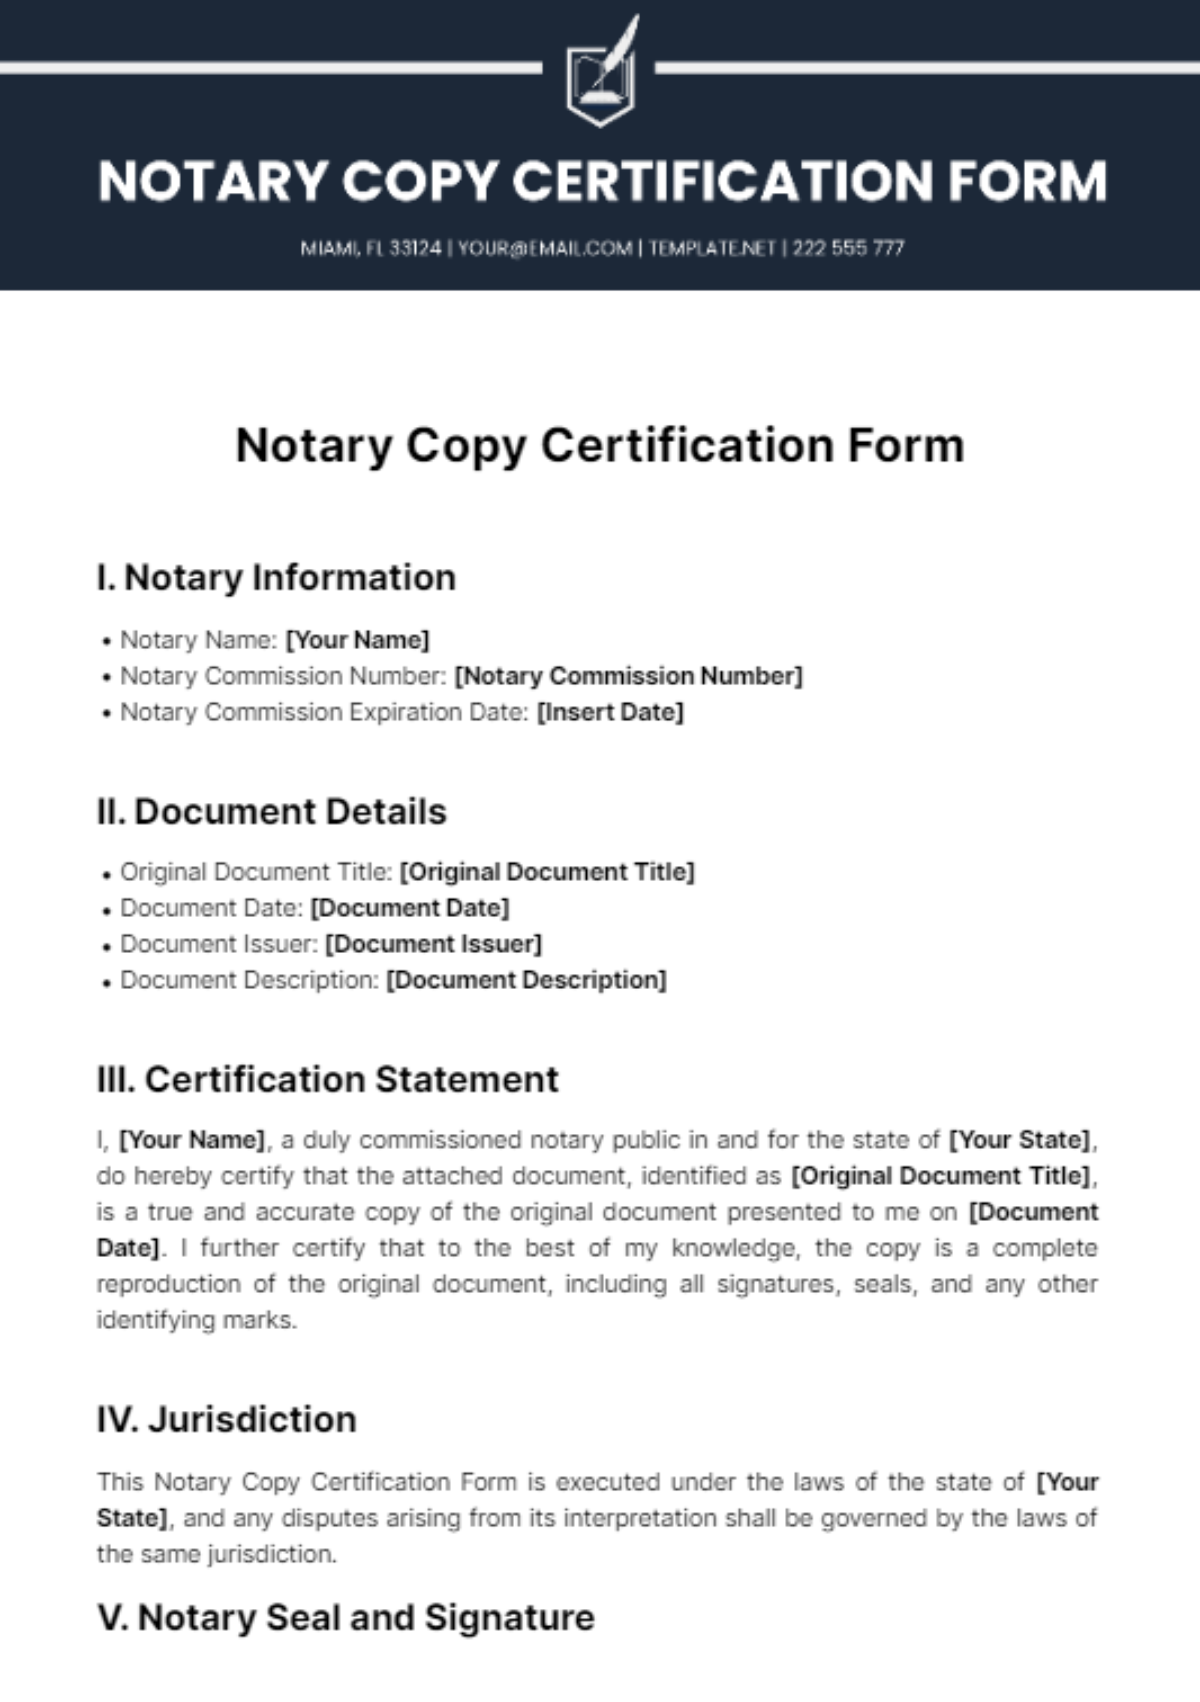 Free Notary Copy Certification Form Template